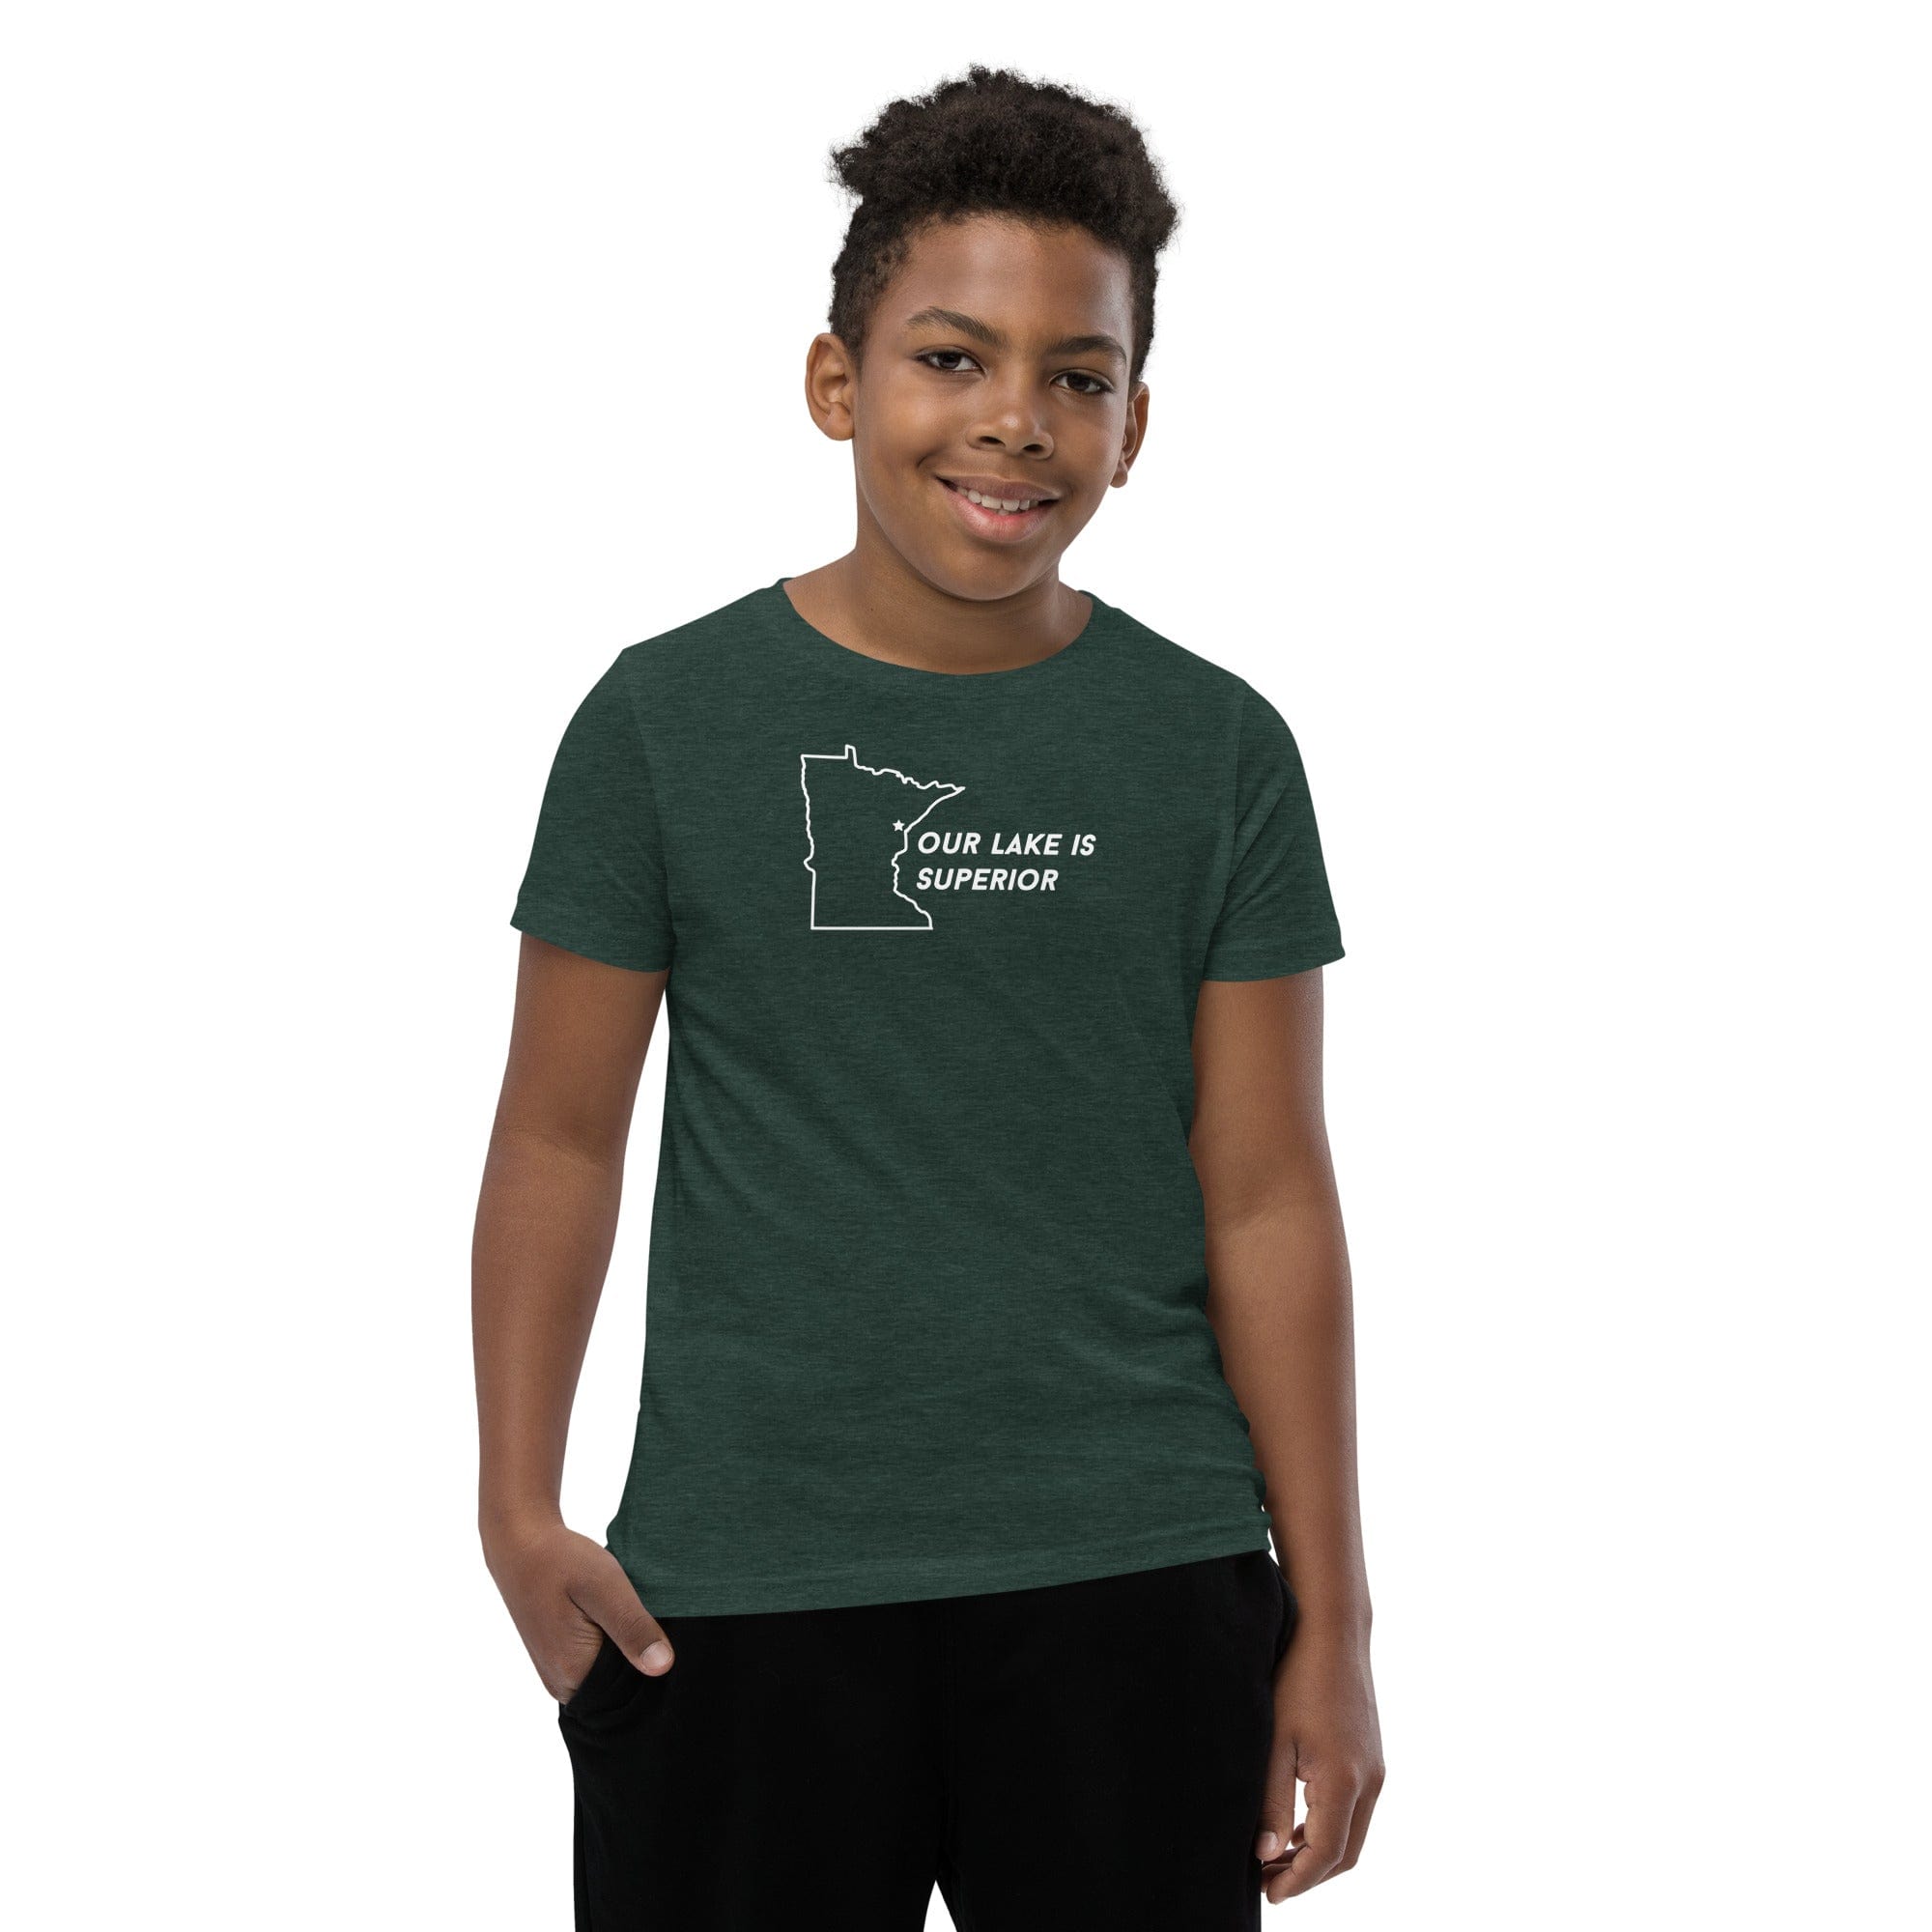 Duluth Our Lake is Superior Kids/Youth T-Shirt ThatMNLife Heather Forest / S Minnesota Custom T-Shirts and Gifts